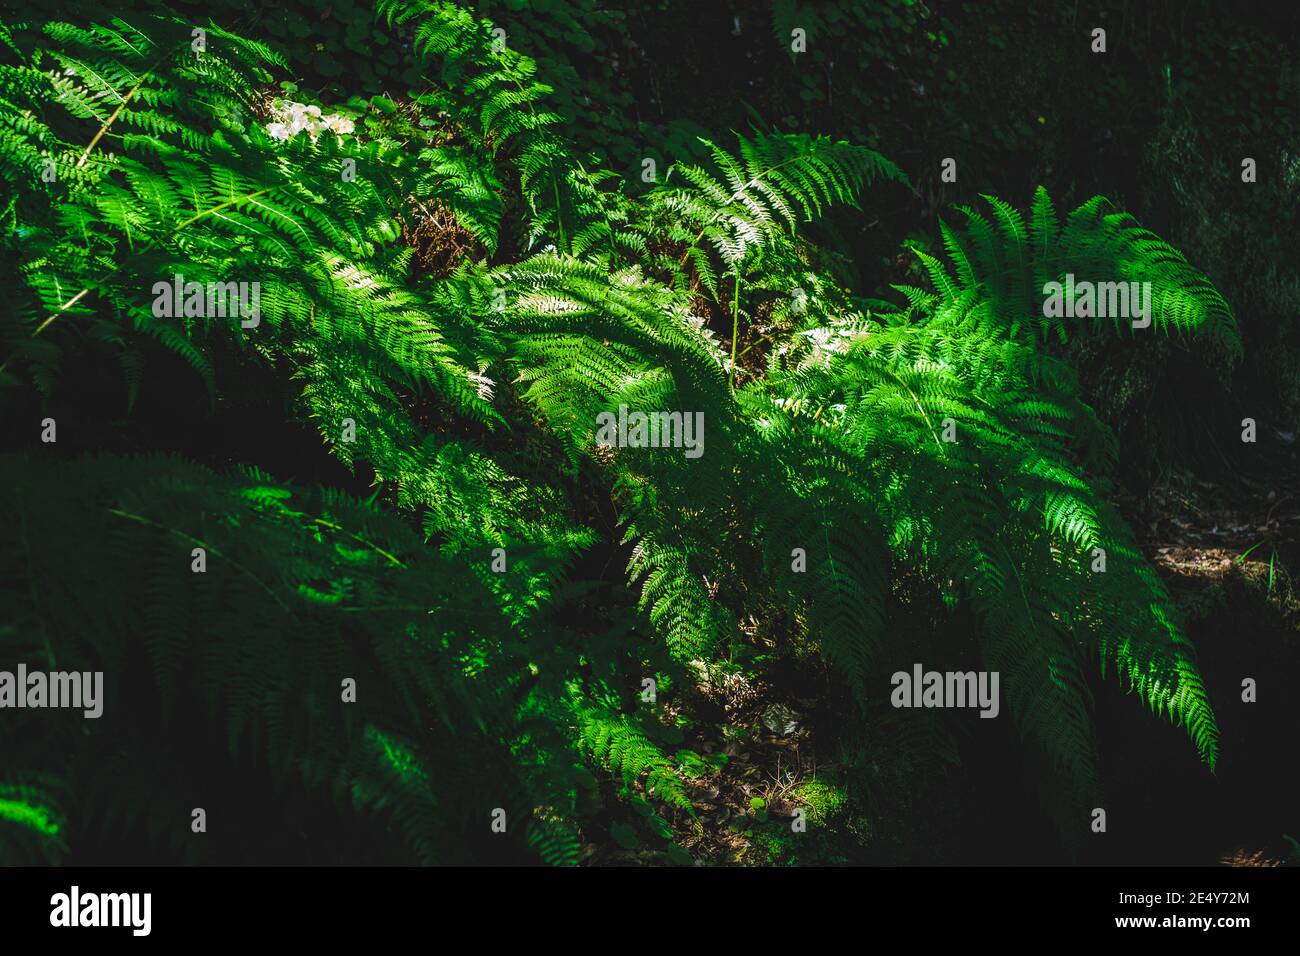 Partial lit fern growing in a tropical forest on the dark shadows but with big leaves Stock Photo